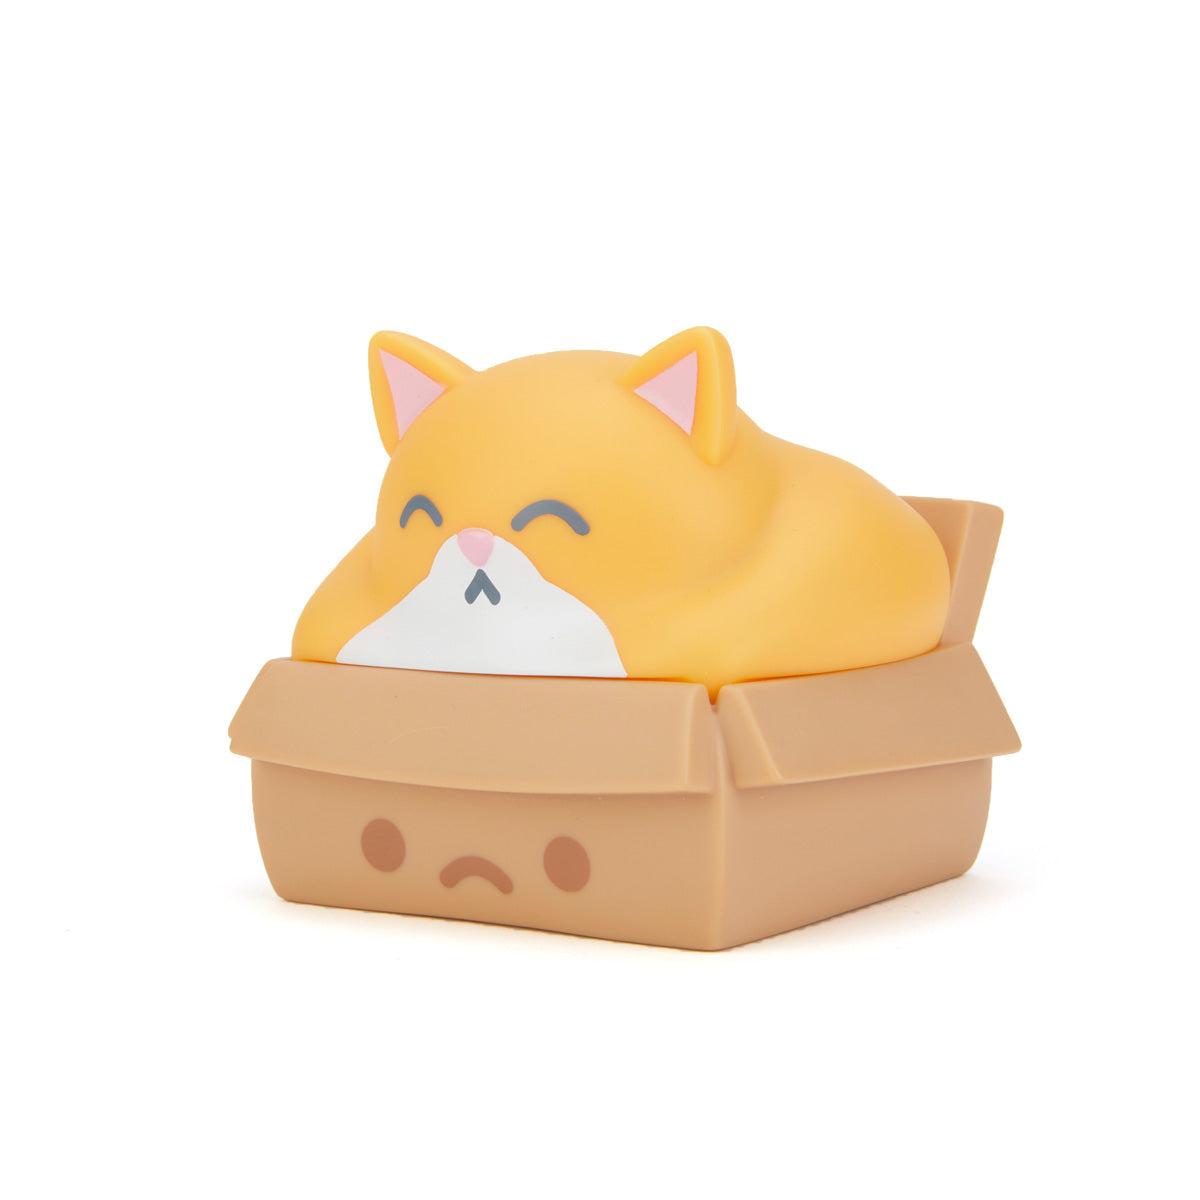 Chonky Trash Kitty Night Light from the side